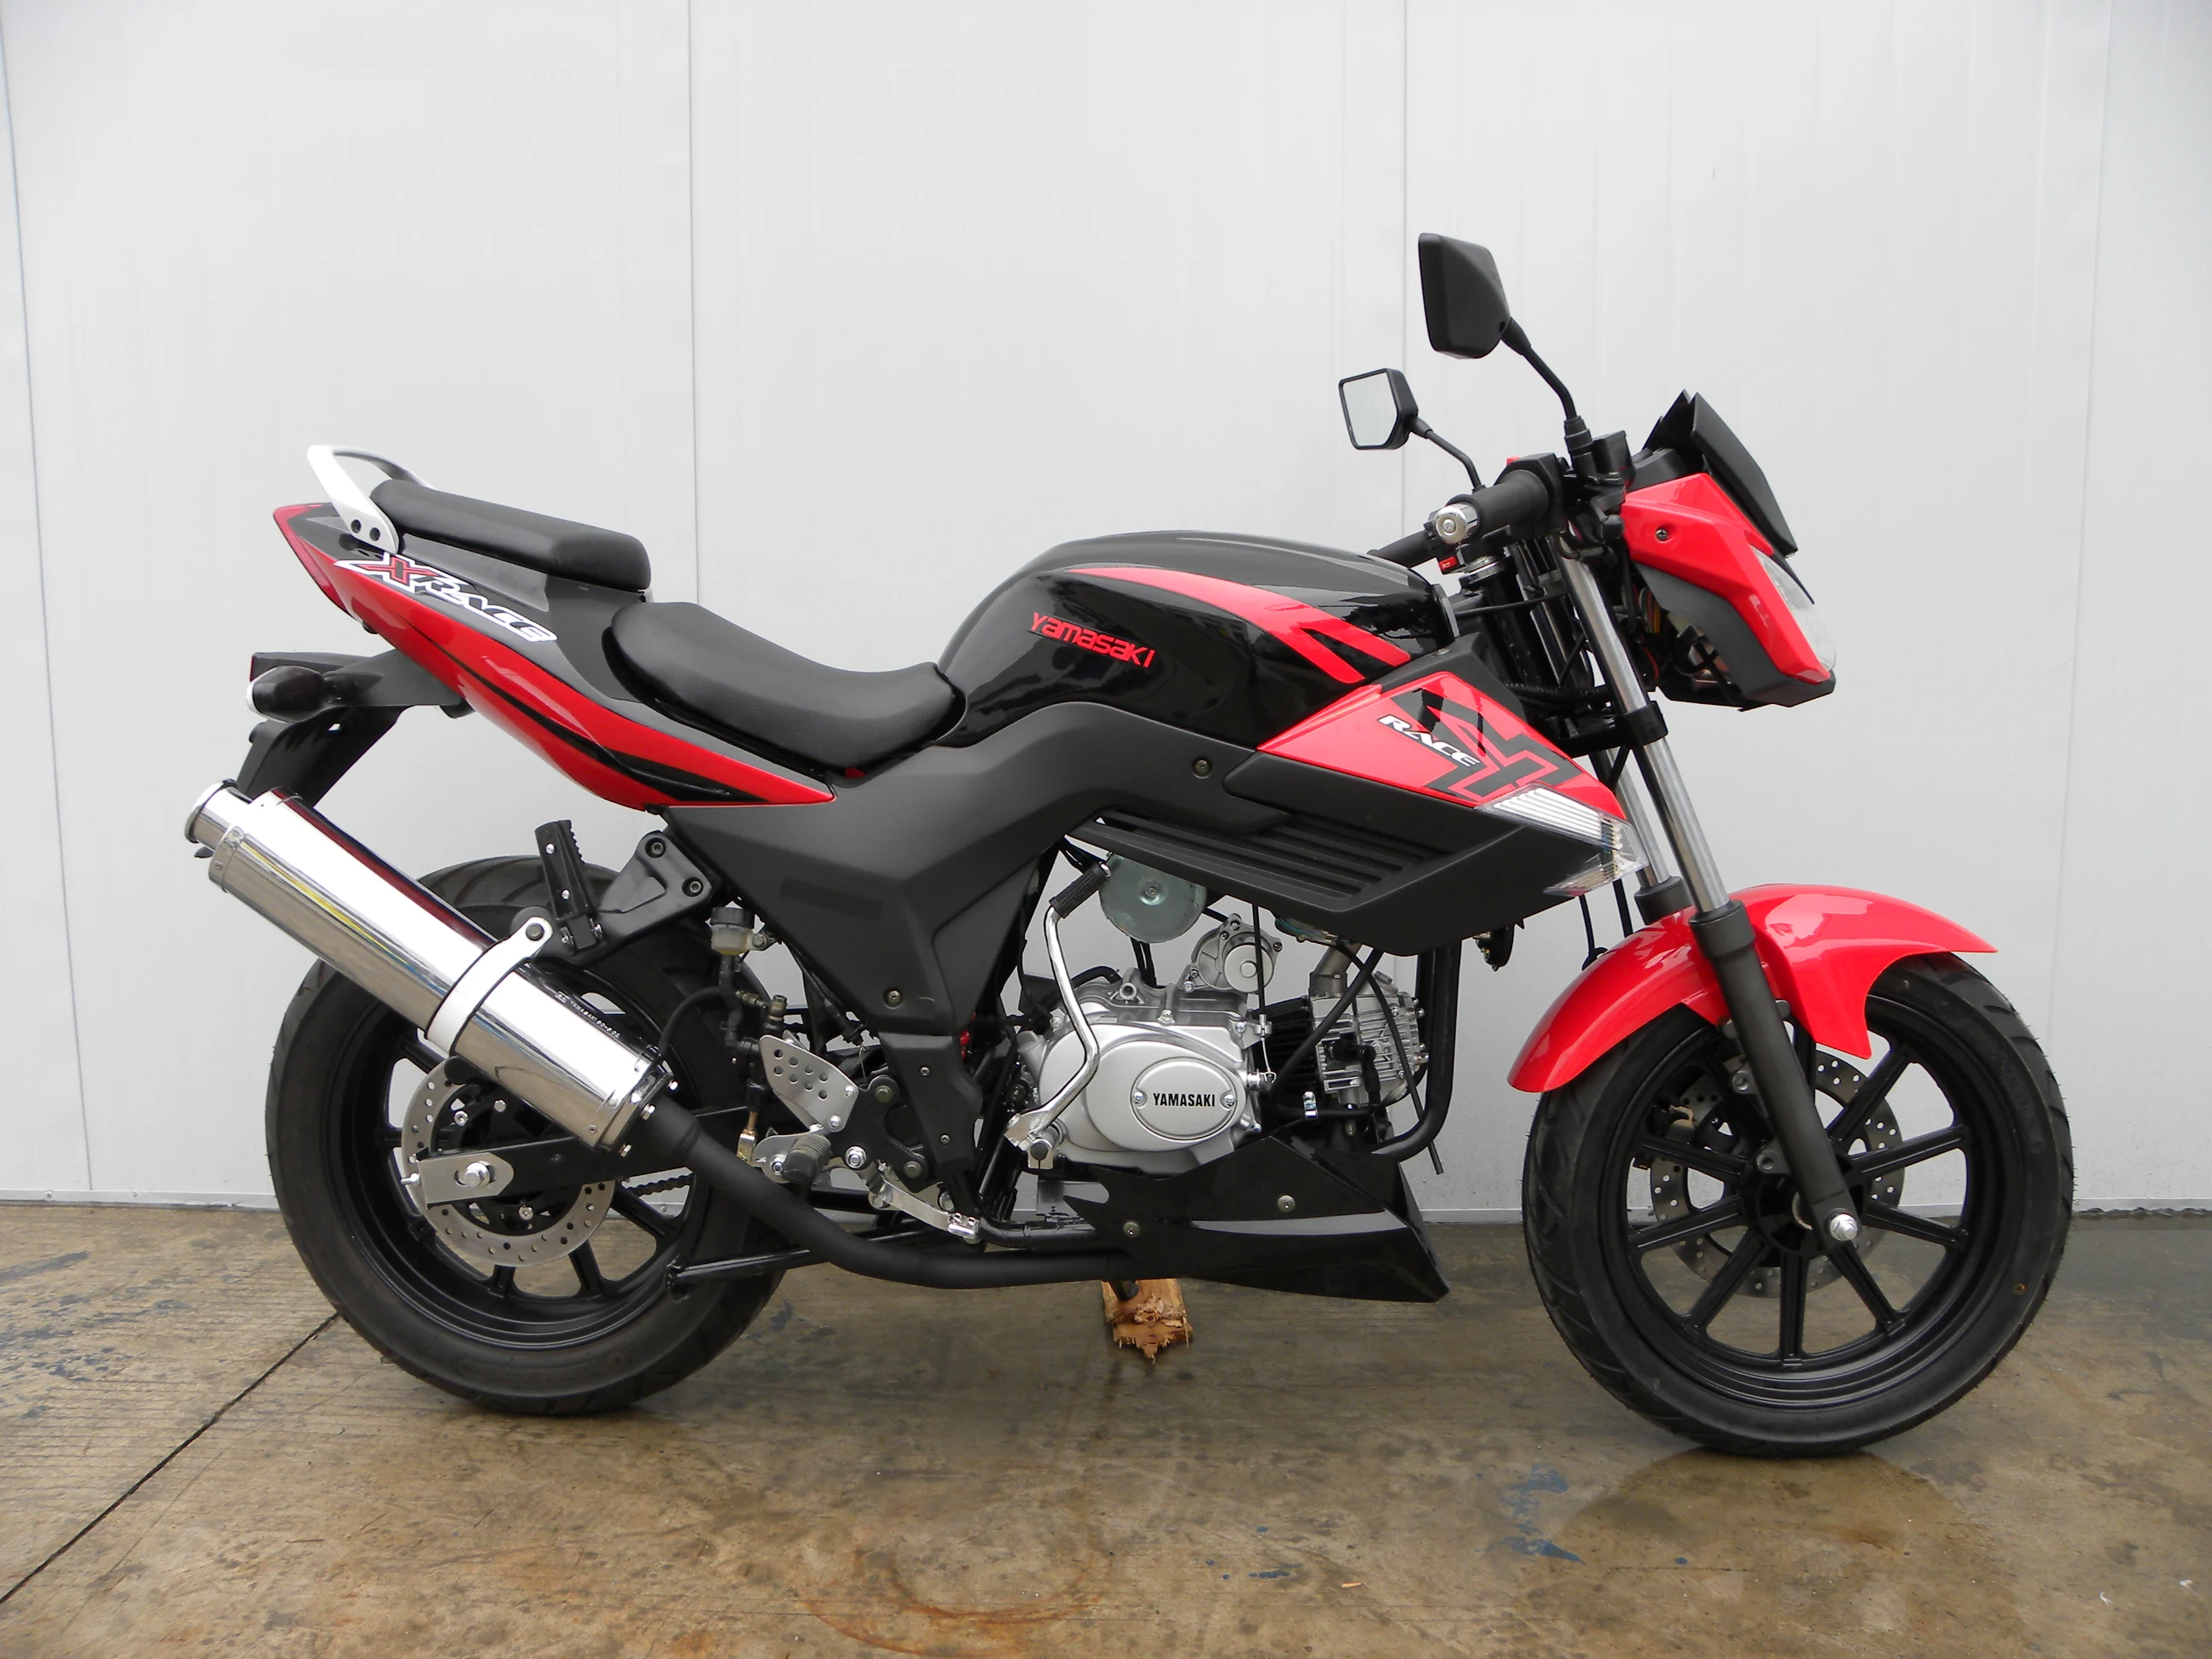 Automatic Motorcycle 50cc Street Bike Sports Motorcycle - Buy Automatic